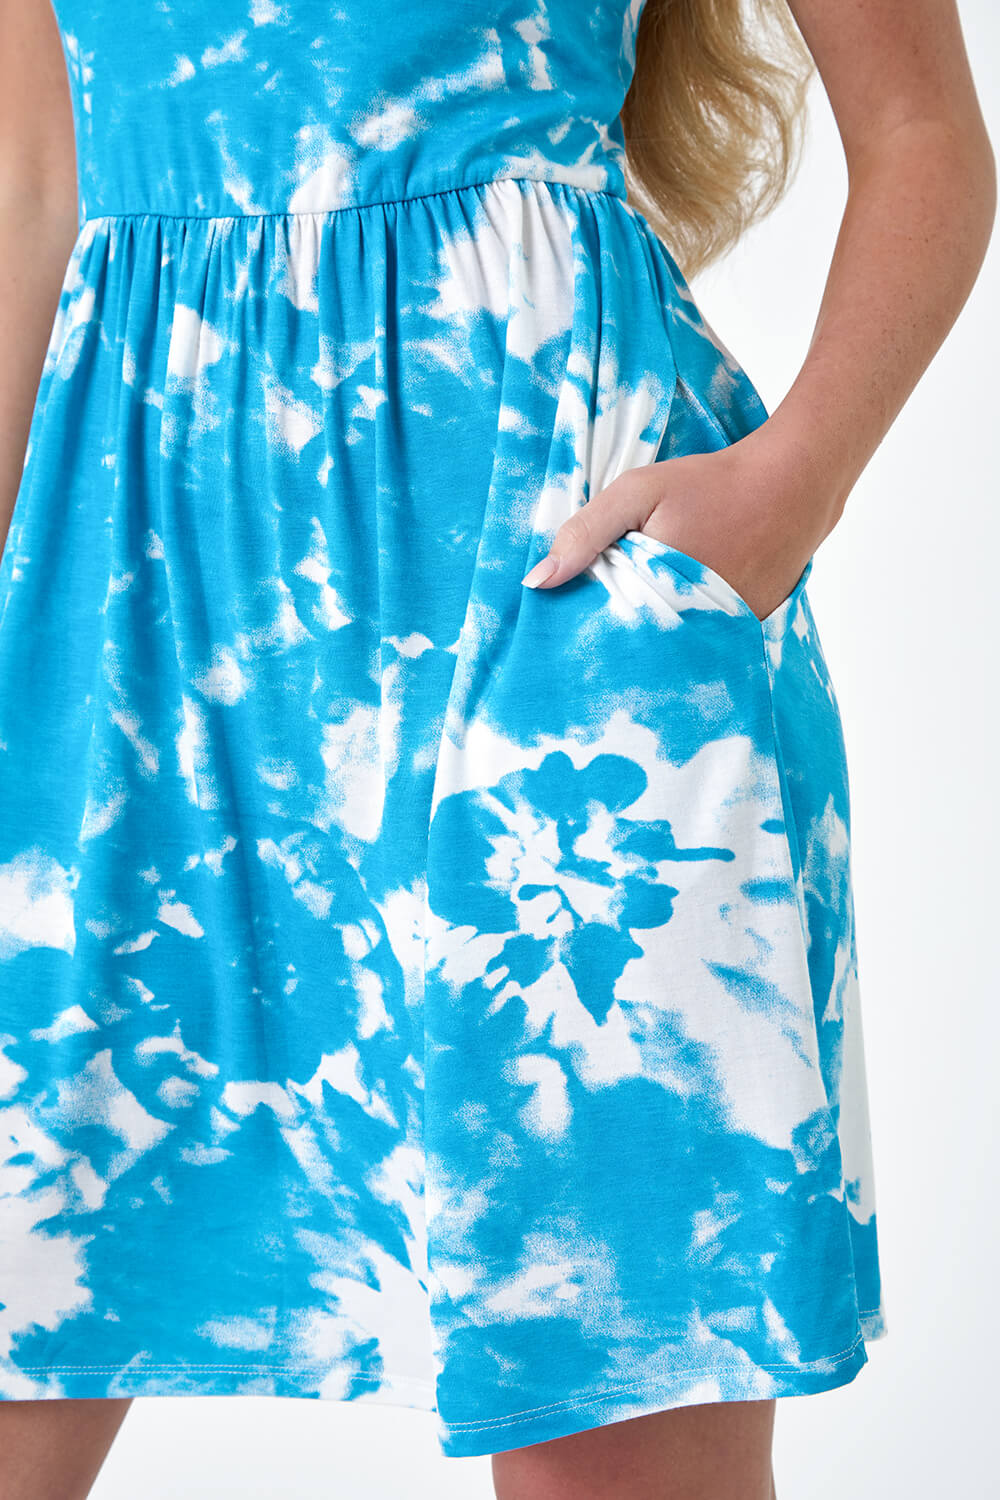 Turquoise Petite Tie Dye Strappy Stretch Pocket Dress, Image 5 of 5